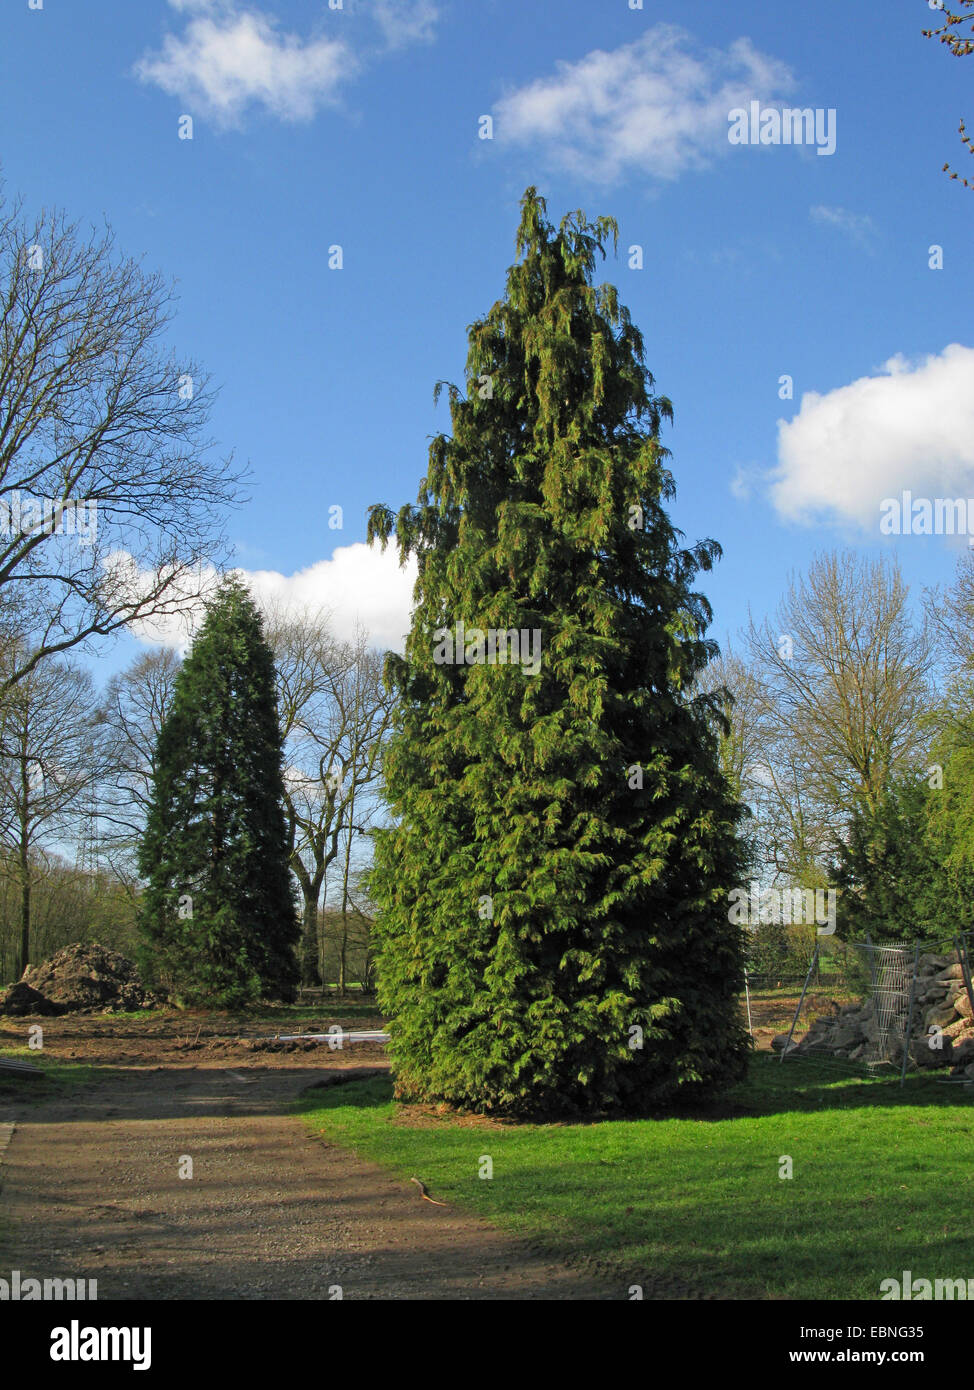 Lawson cypress, Port Orford cedar (Chamaecyparis lawsoniana), tree in a park, Gigant Sequoia in the background, Germany Stock Photo